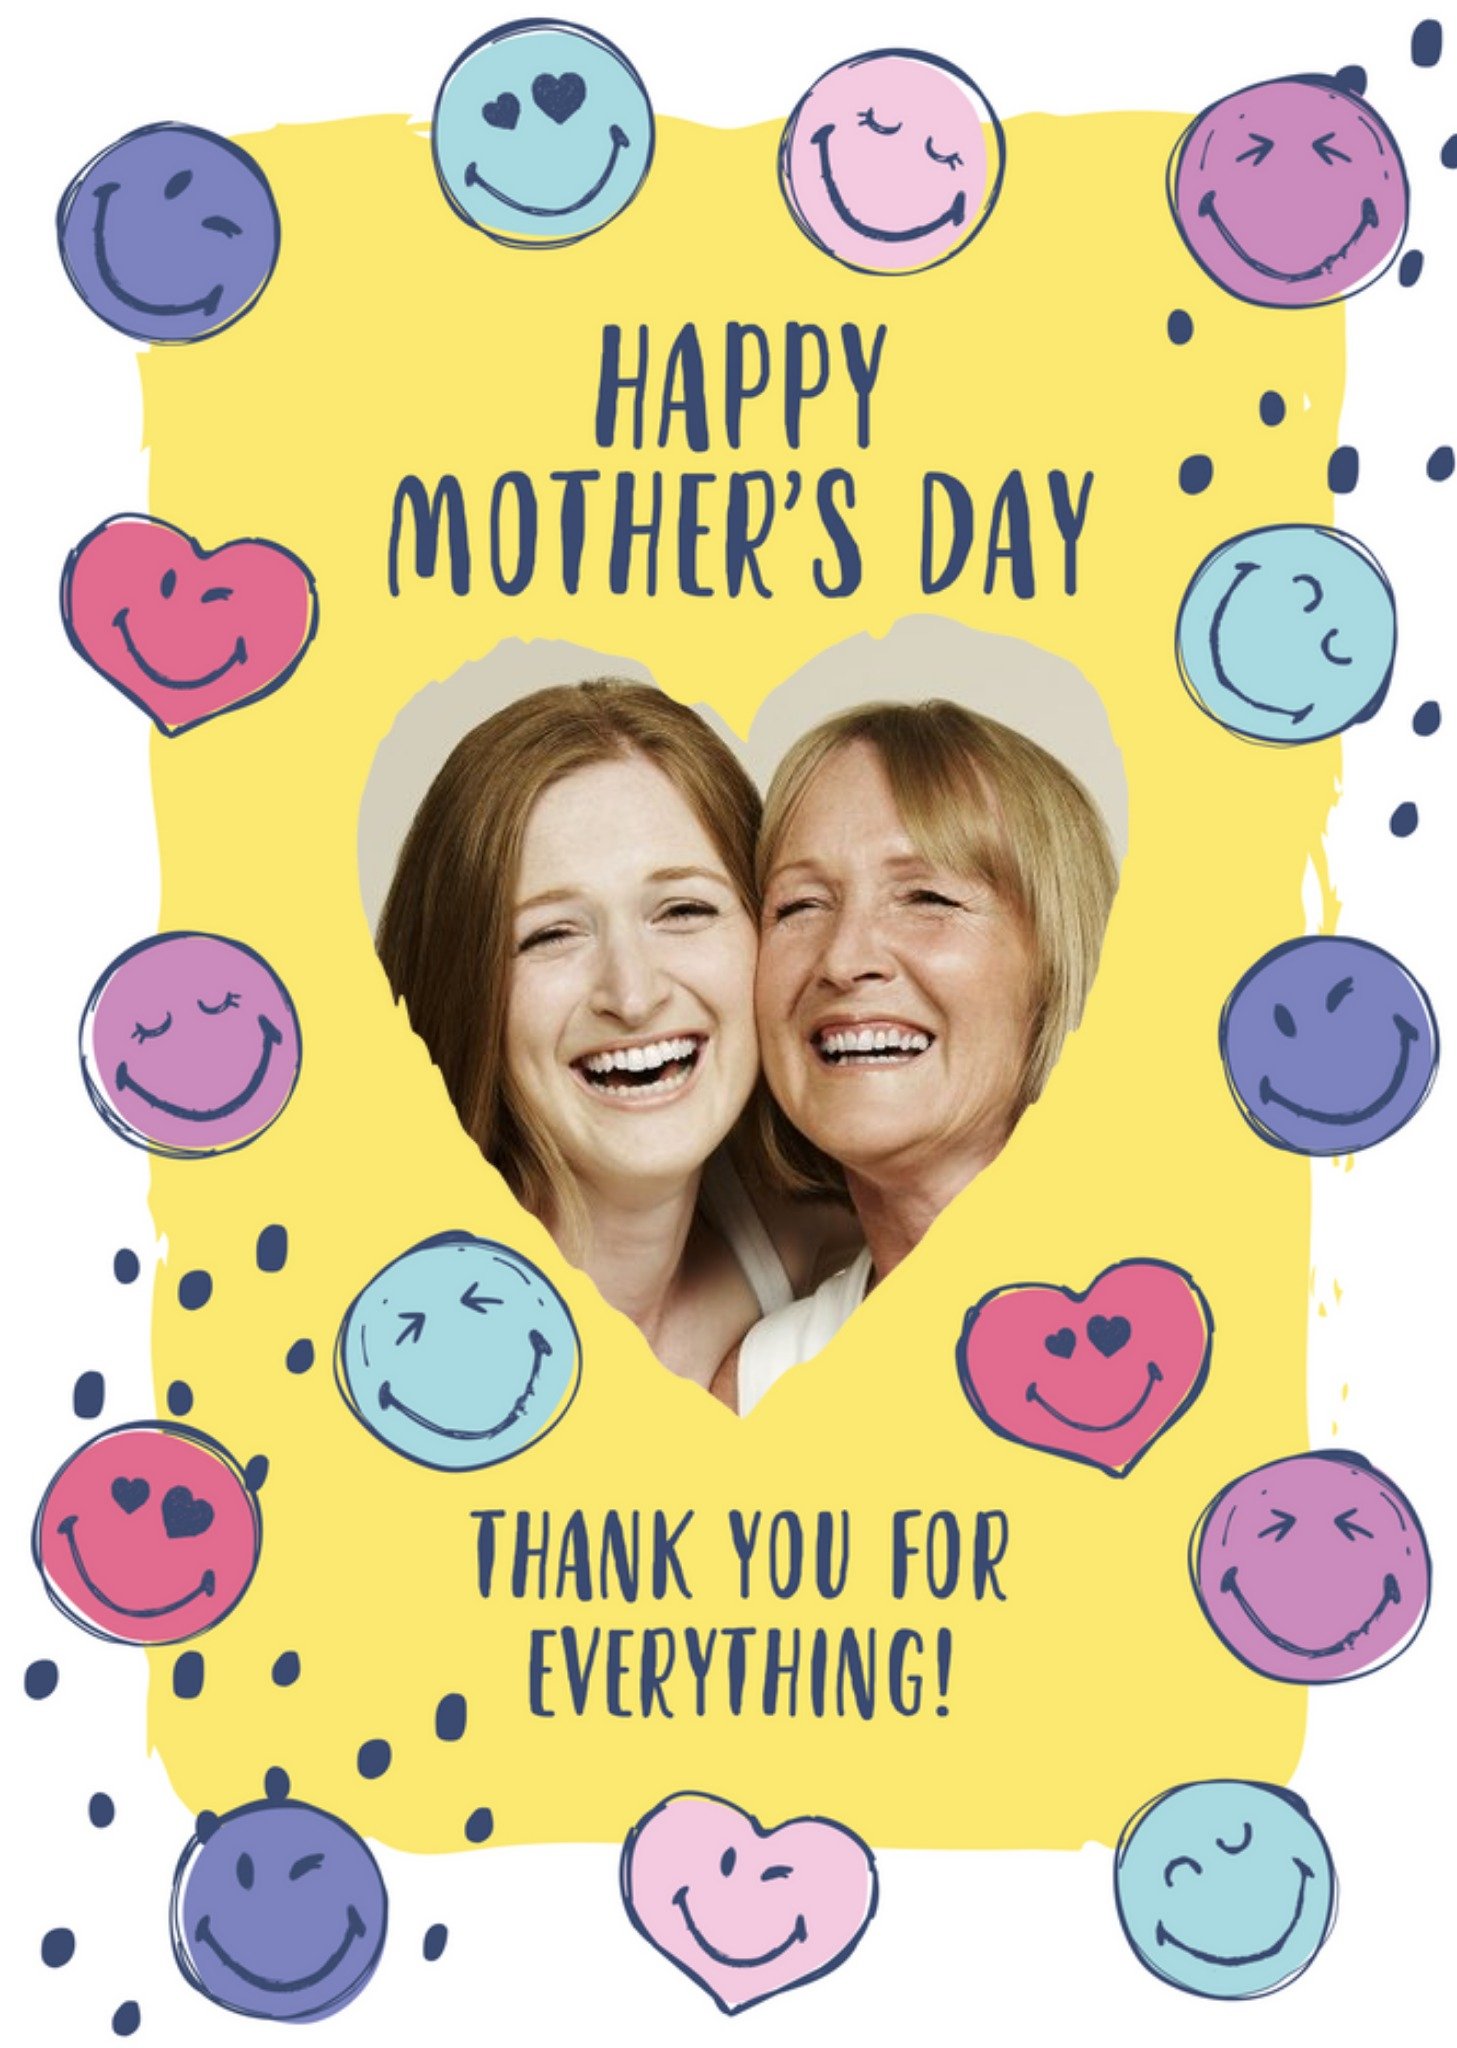 Moonpig Smiley World Me And You Love Heart Photo Upload Mothers Day Card Ecard